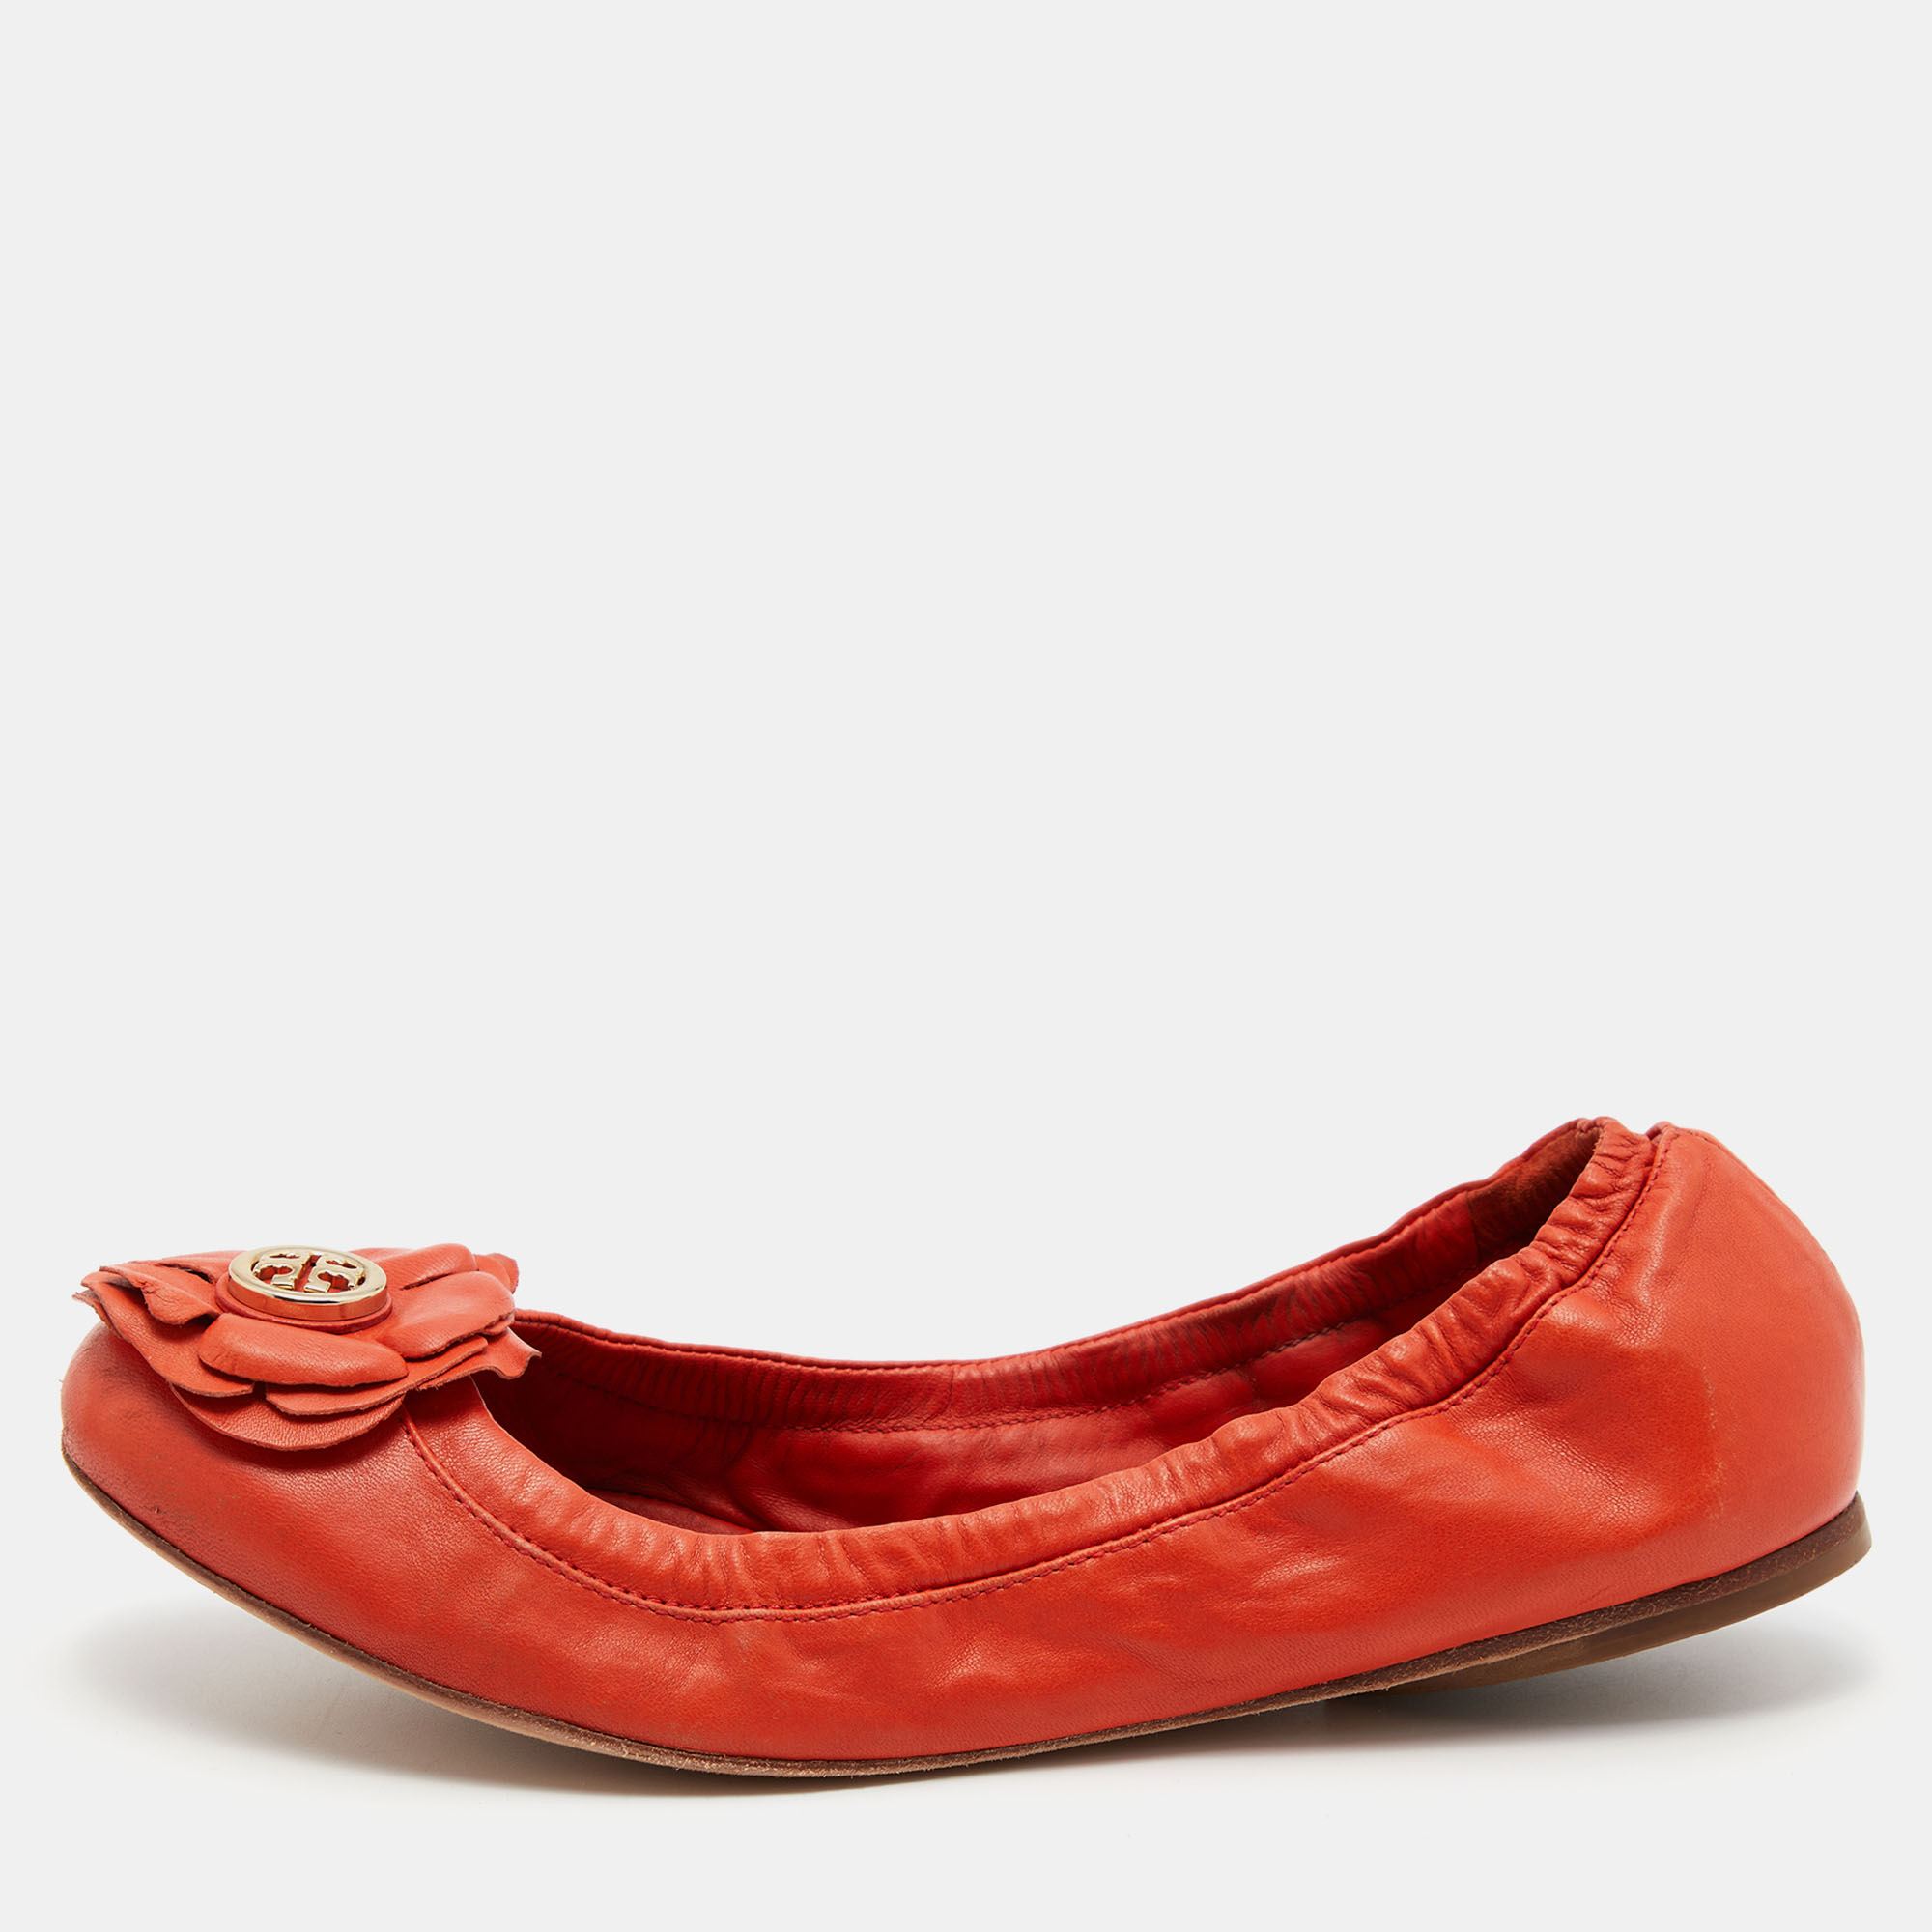 Pre-owned Tory Burch Orange Leather Scrunch Ballet Flats Size 38